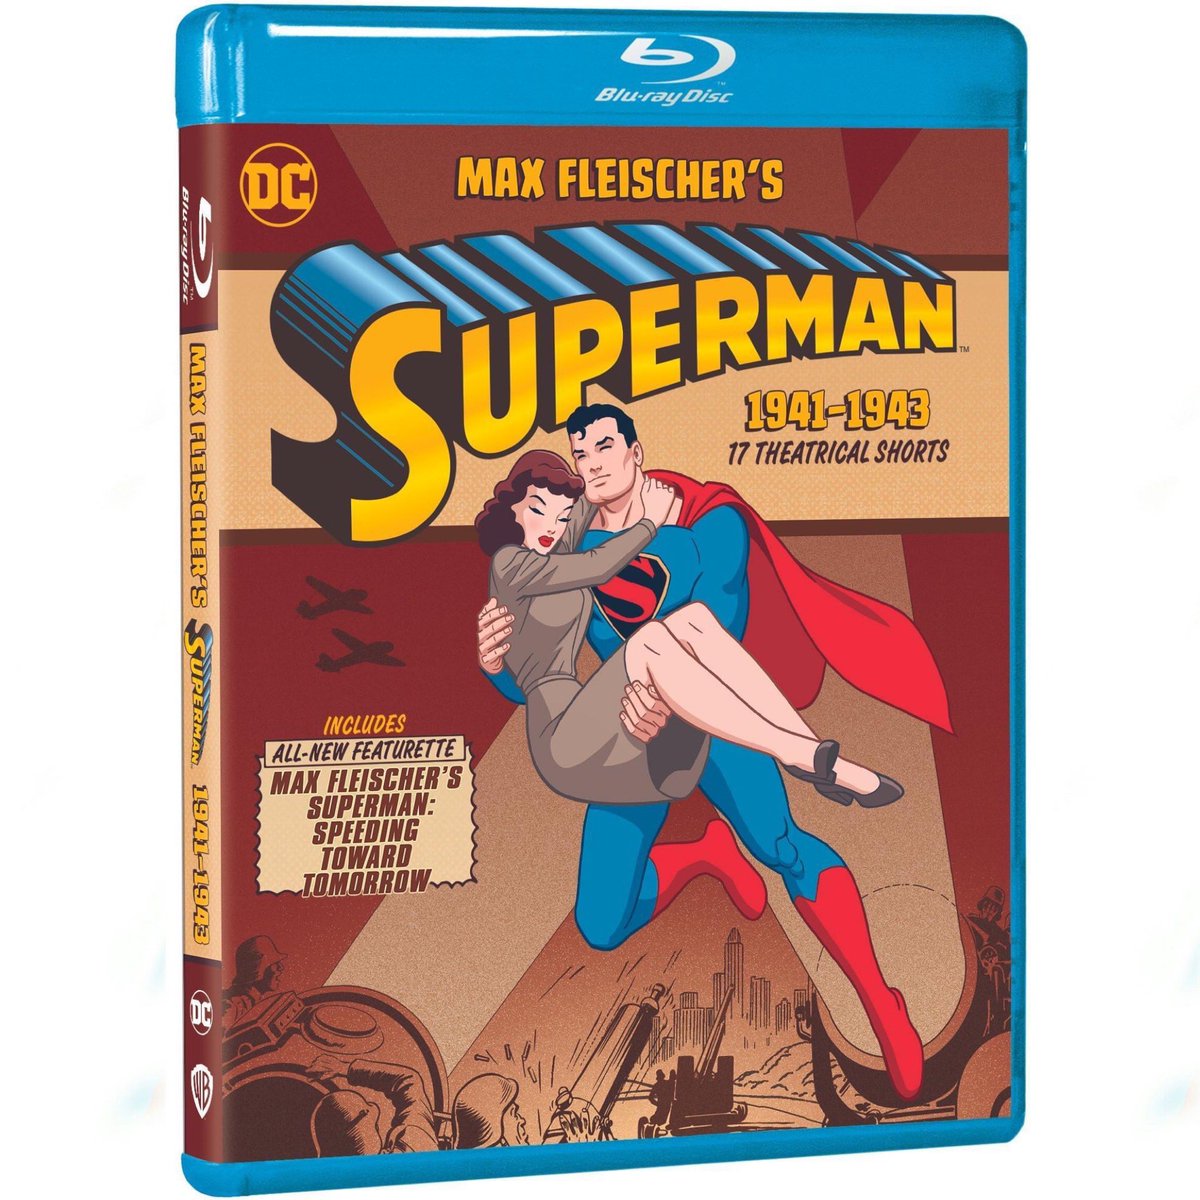 Whoa! 🥳😍 I'm sooooo gettin' this! I have it in different editions already but ON BLURAY?!? Gotta have the #MaxFleischer's #Superman theatrical shorts! This is truly, SUPER news!